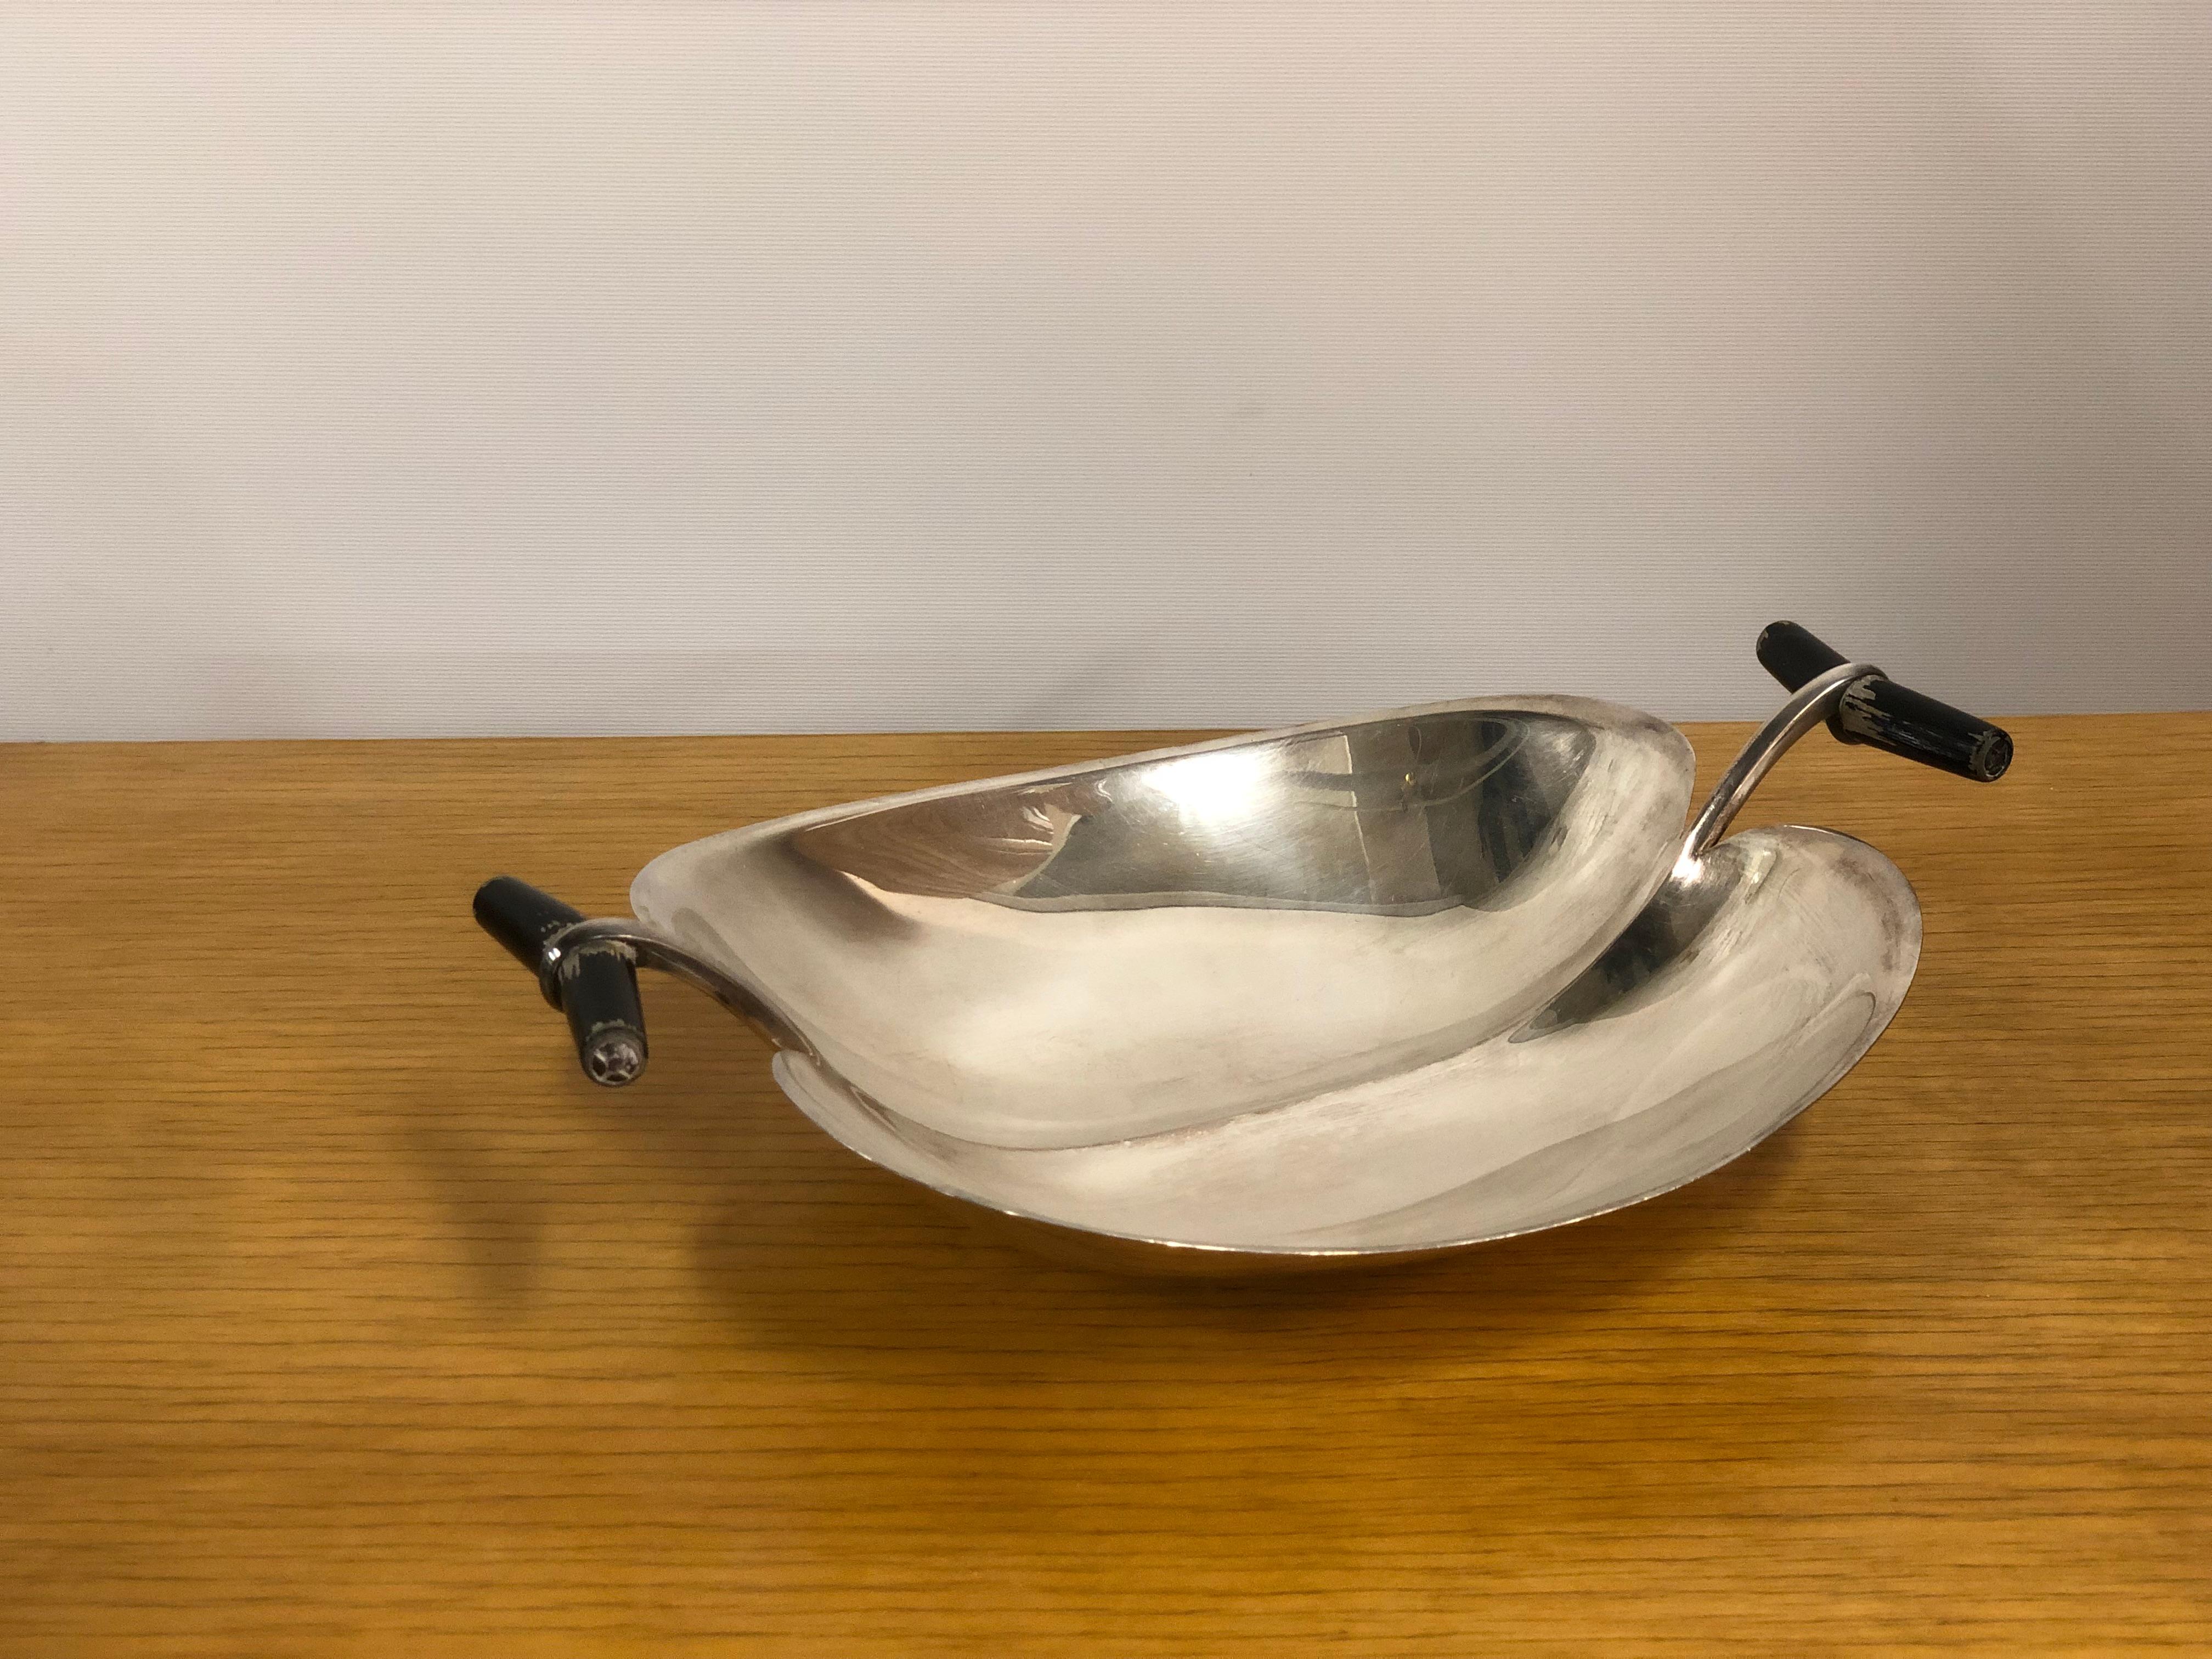 Tapio Wirkkala serving dish in silver with wooden handles, made in the 1950s. This piece displays one of Wirkkala's many beautiful designs almost resembling a seashell. The bottom of the dish is marked 